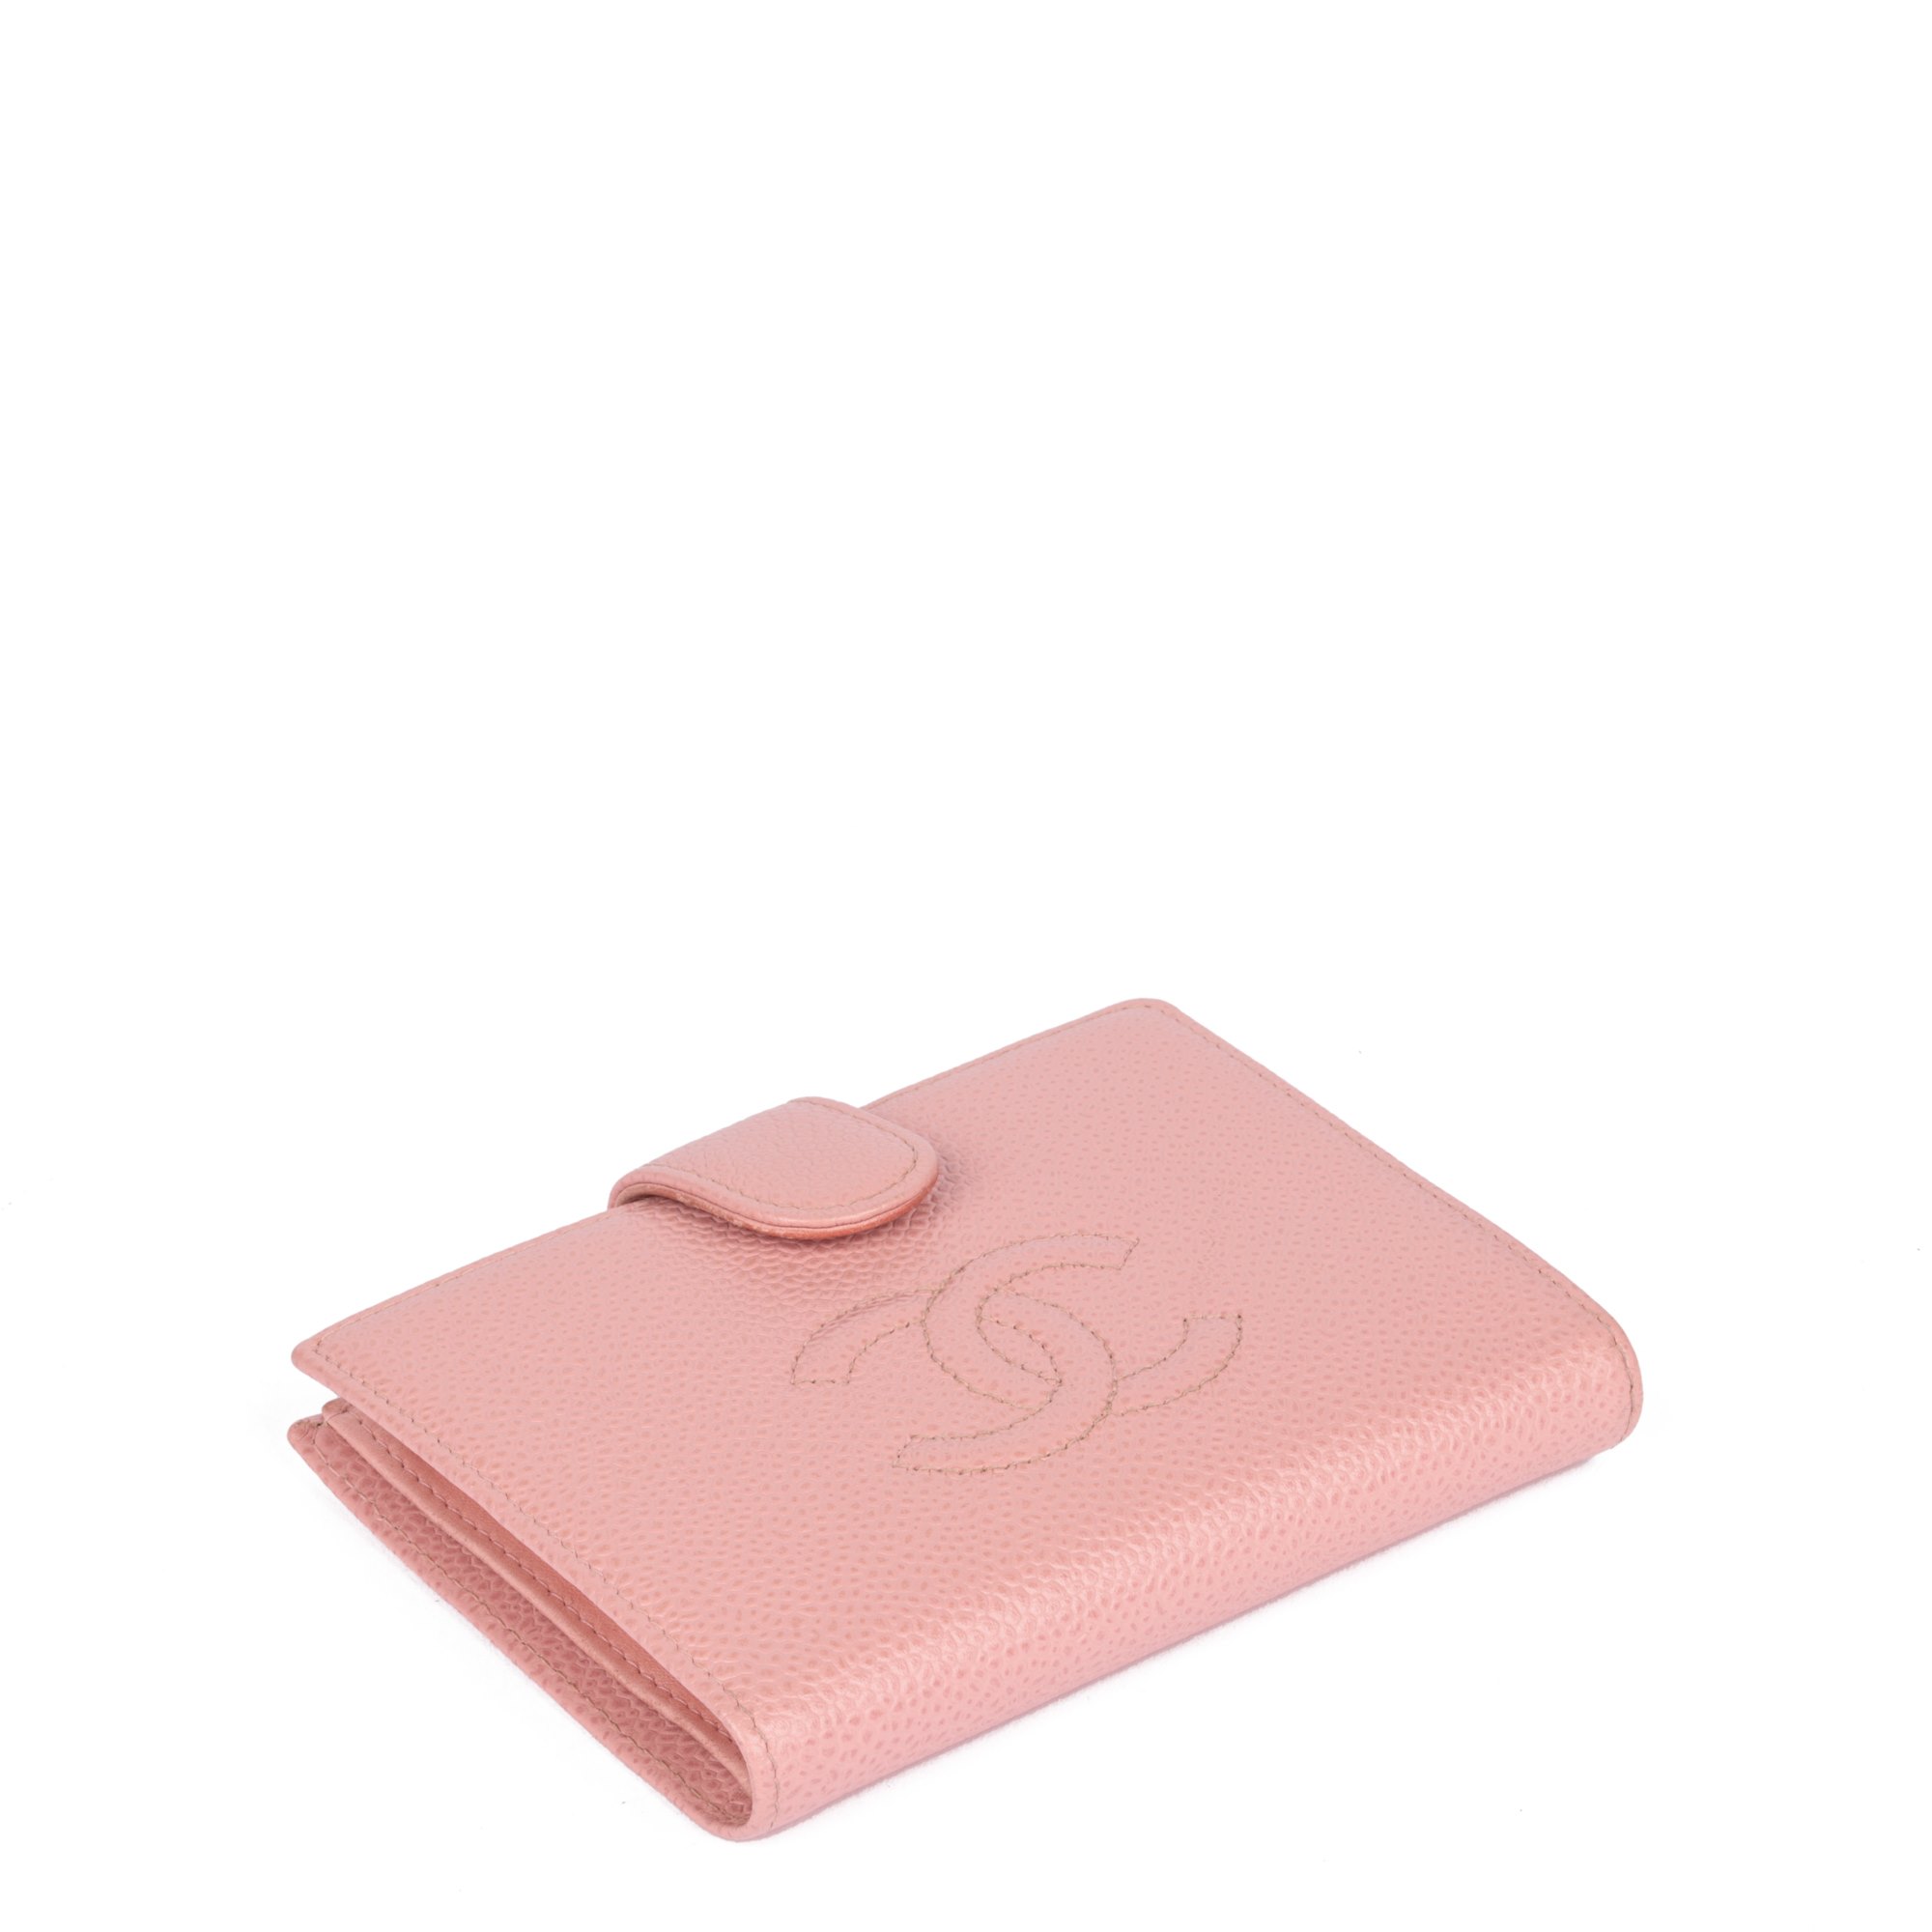 Chanel Pink Caviar Leather Timeless Compact Wallet